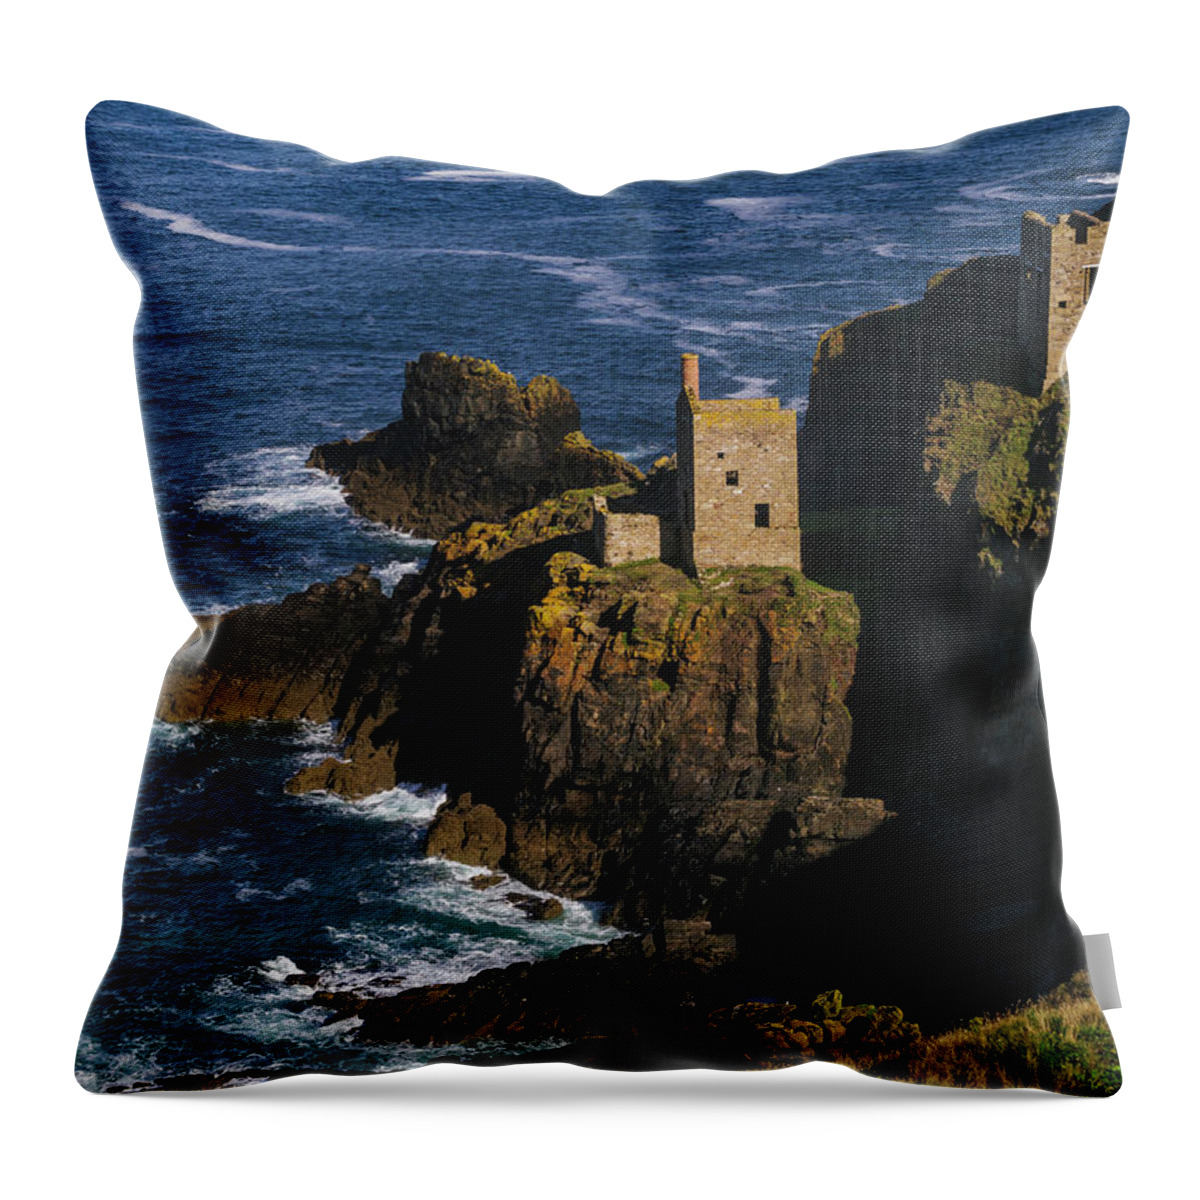 Scenics Throw Pillow featuring the photograph Abandoned Tin Mines Near Bottalack #3 by Doug Armand